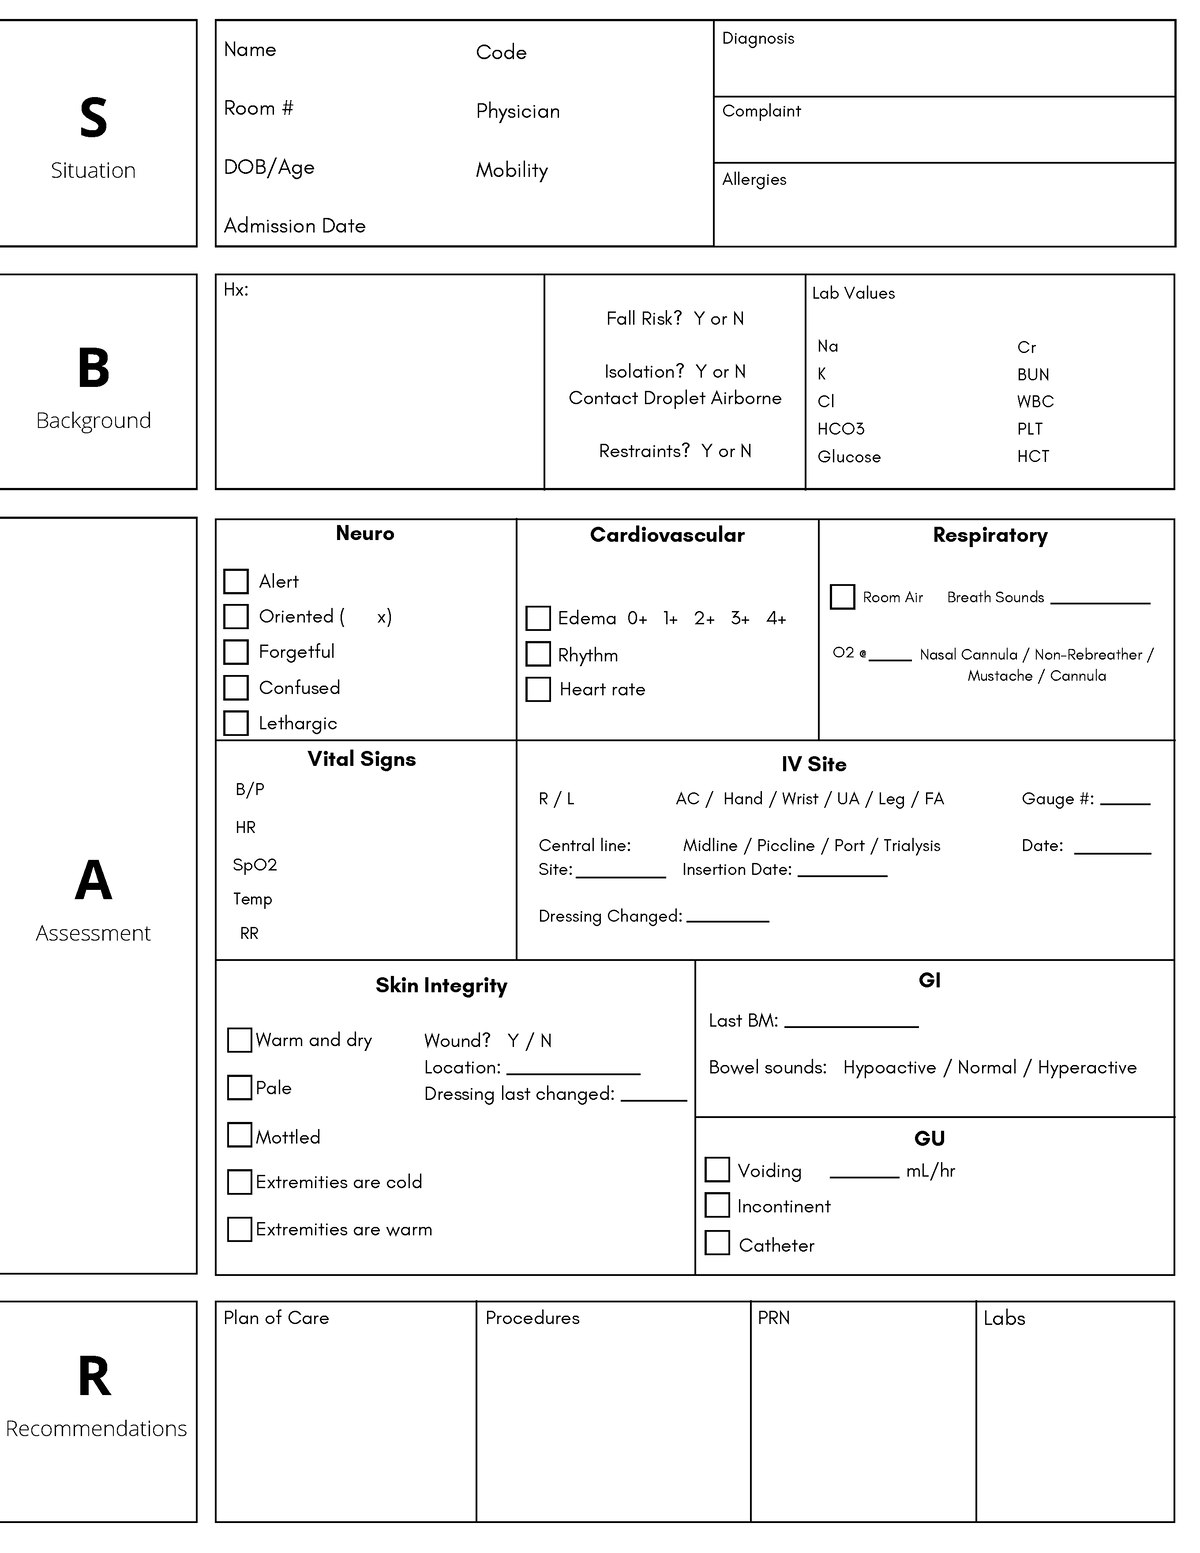 SBAR WorkSheet For Clinical - S Situation B Background A Assessment R ...